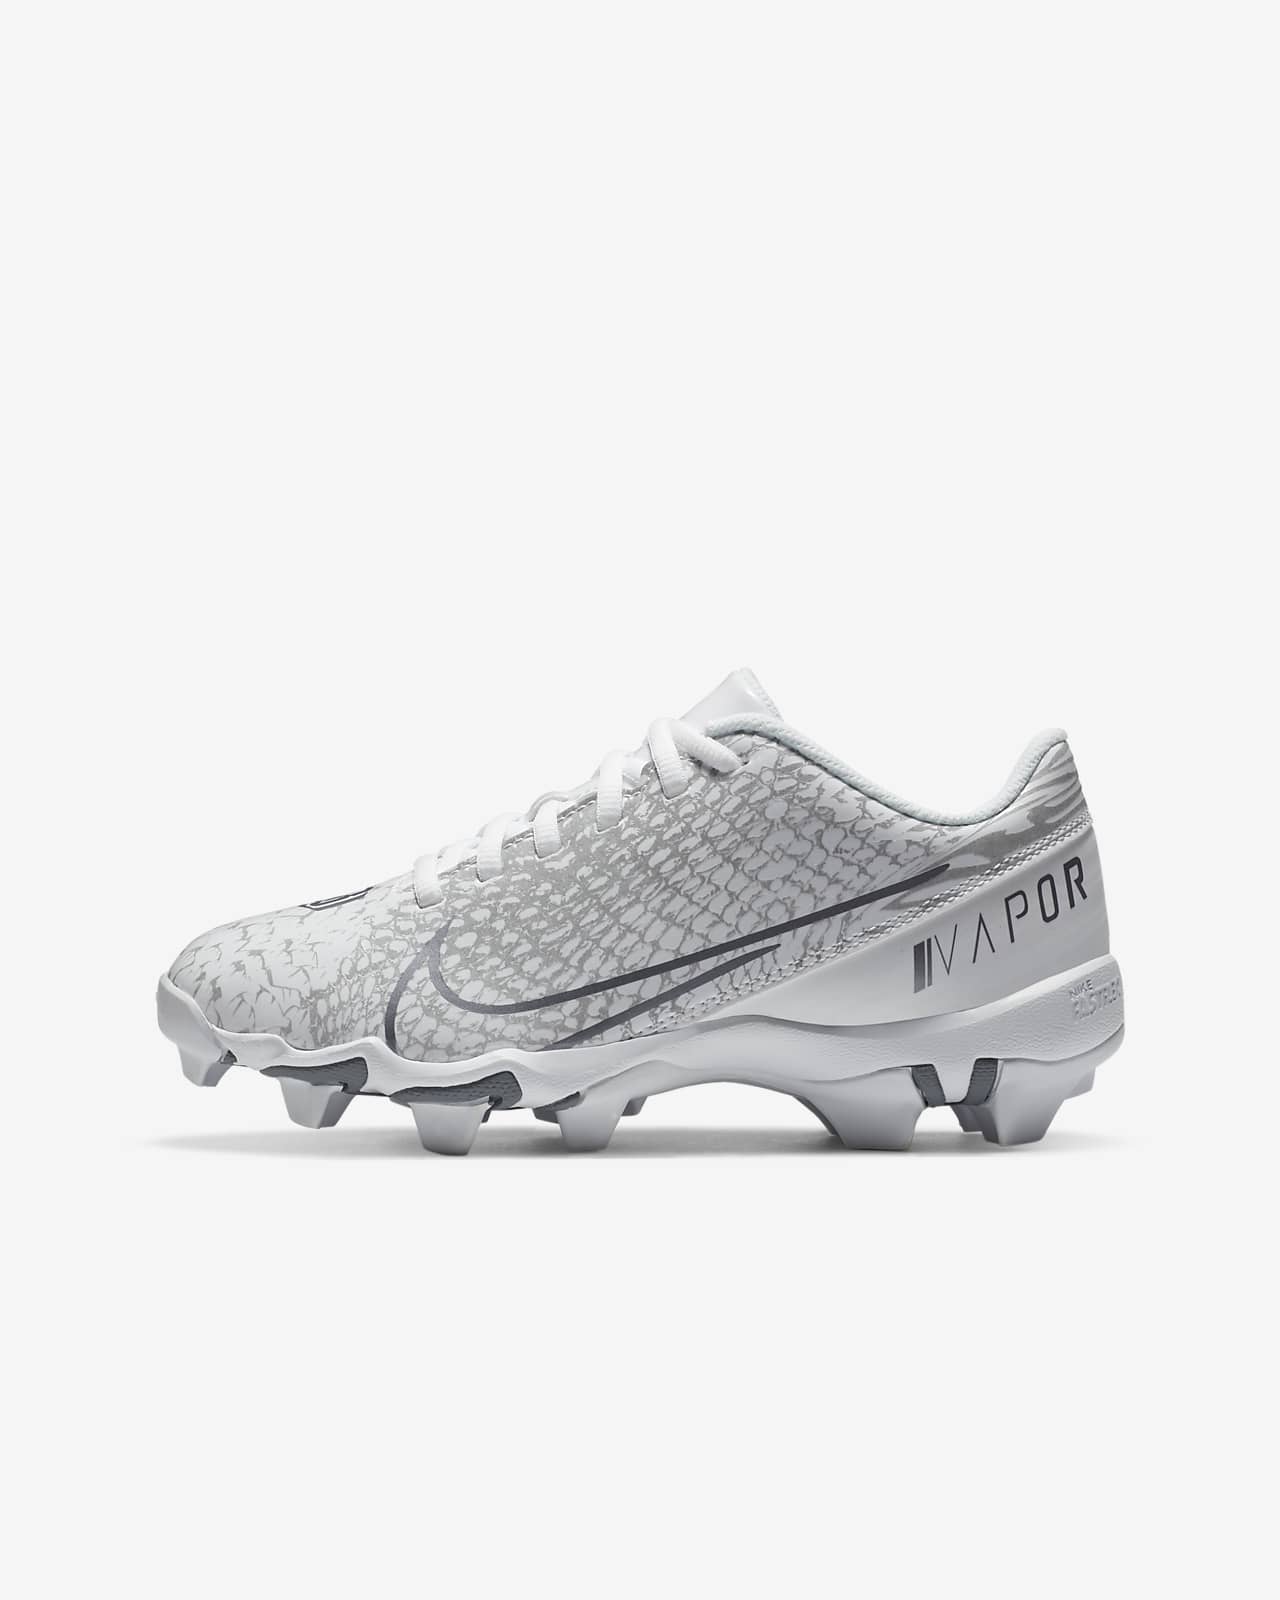 youth cleats football nike